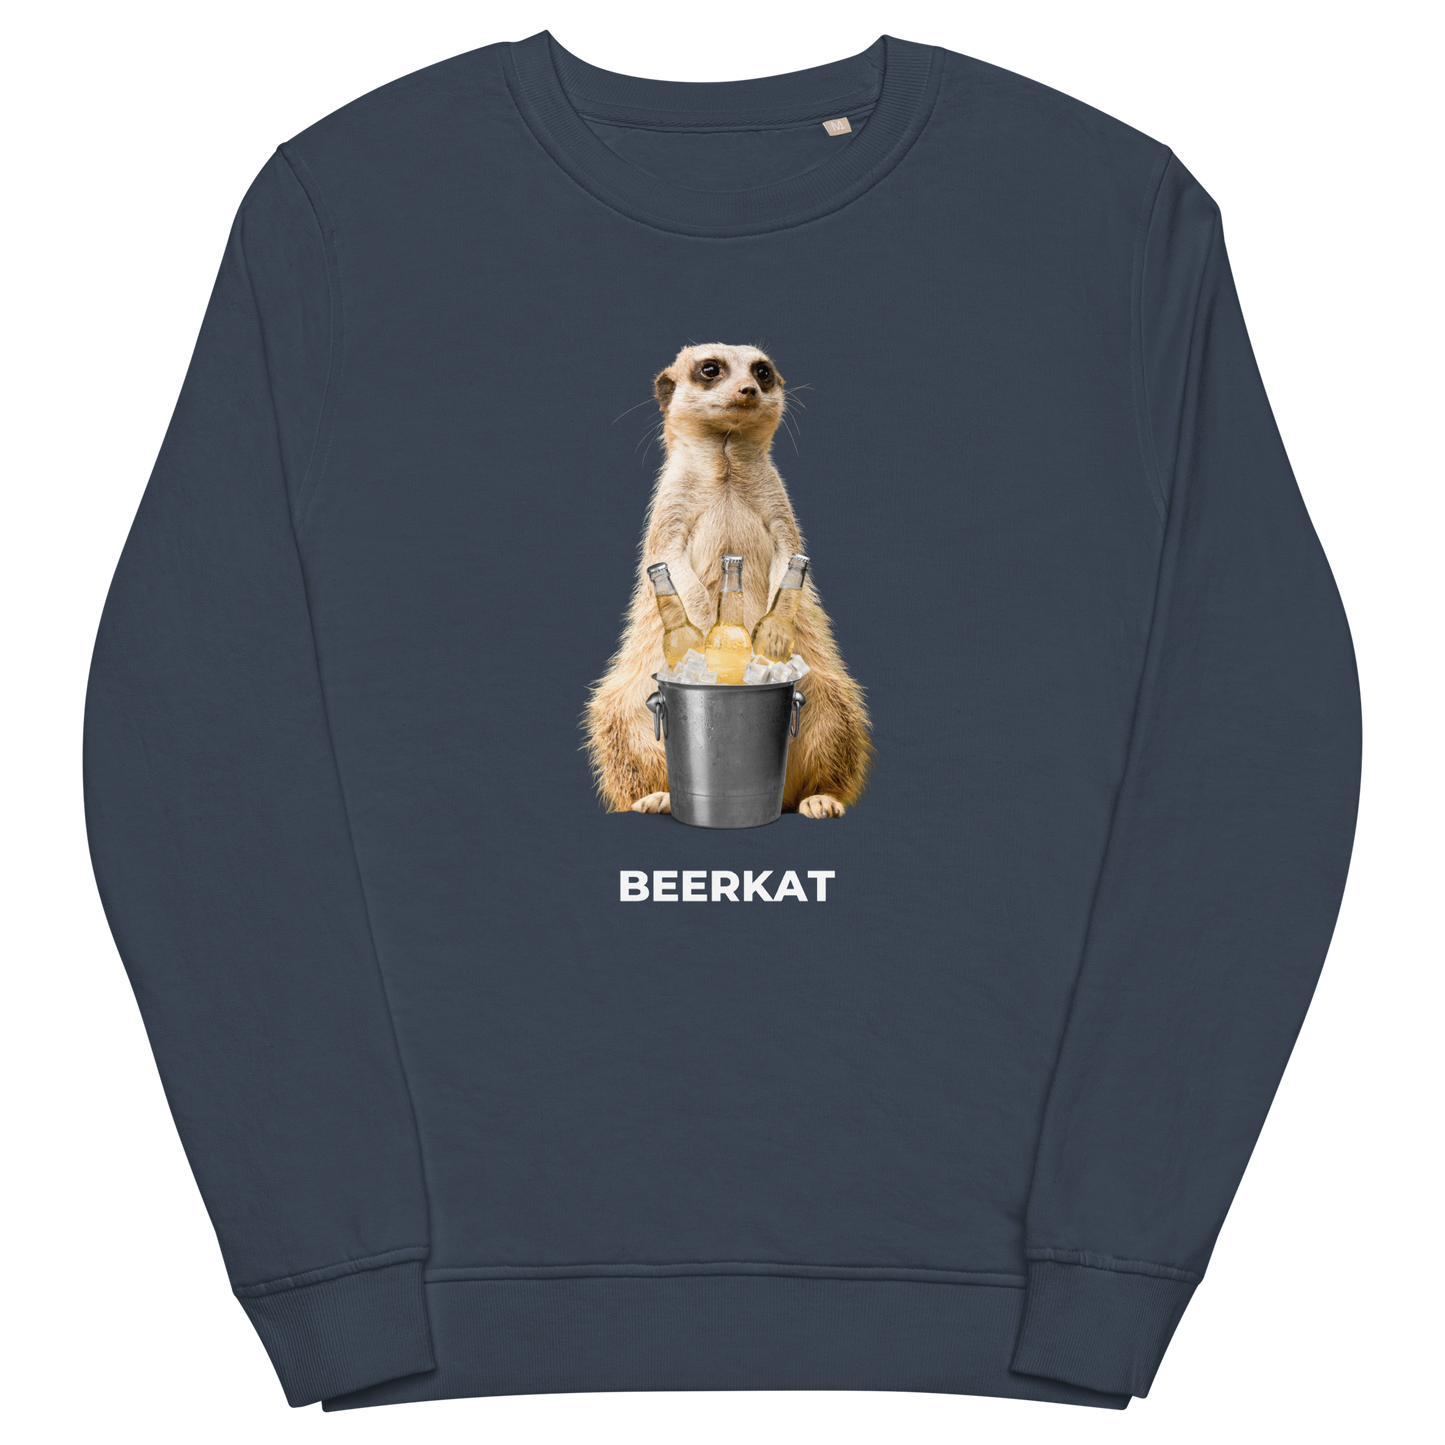 French Navy Organic Cotton Meerkat Sweatshirt featuring a hilarious Beerkat graphic on the chest - Funny Graphic Meerkat Sweatshirts - Boozy Fox